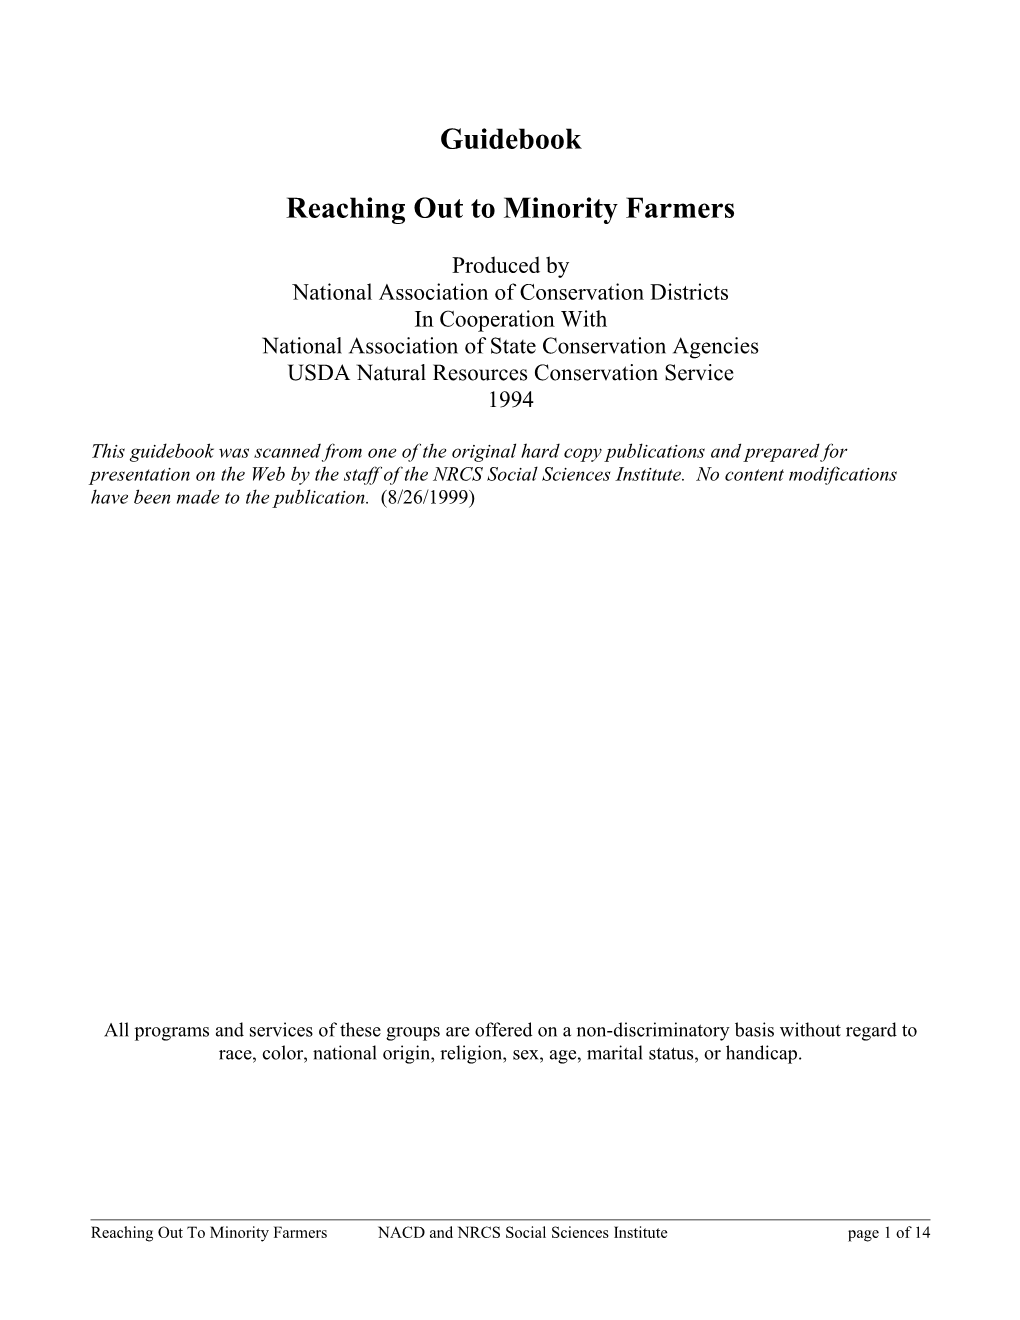 Reaching out to Minority Farmers